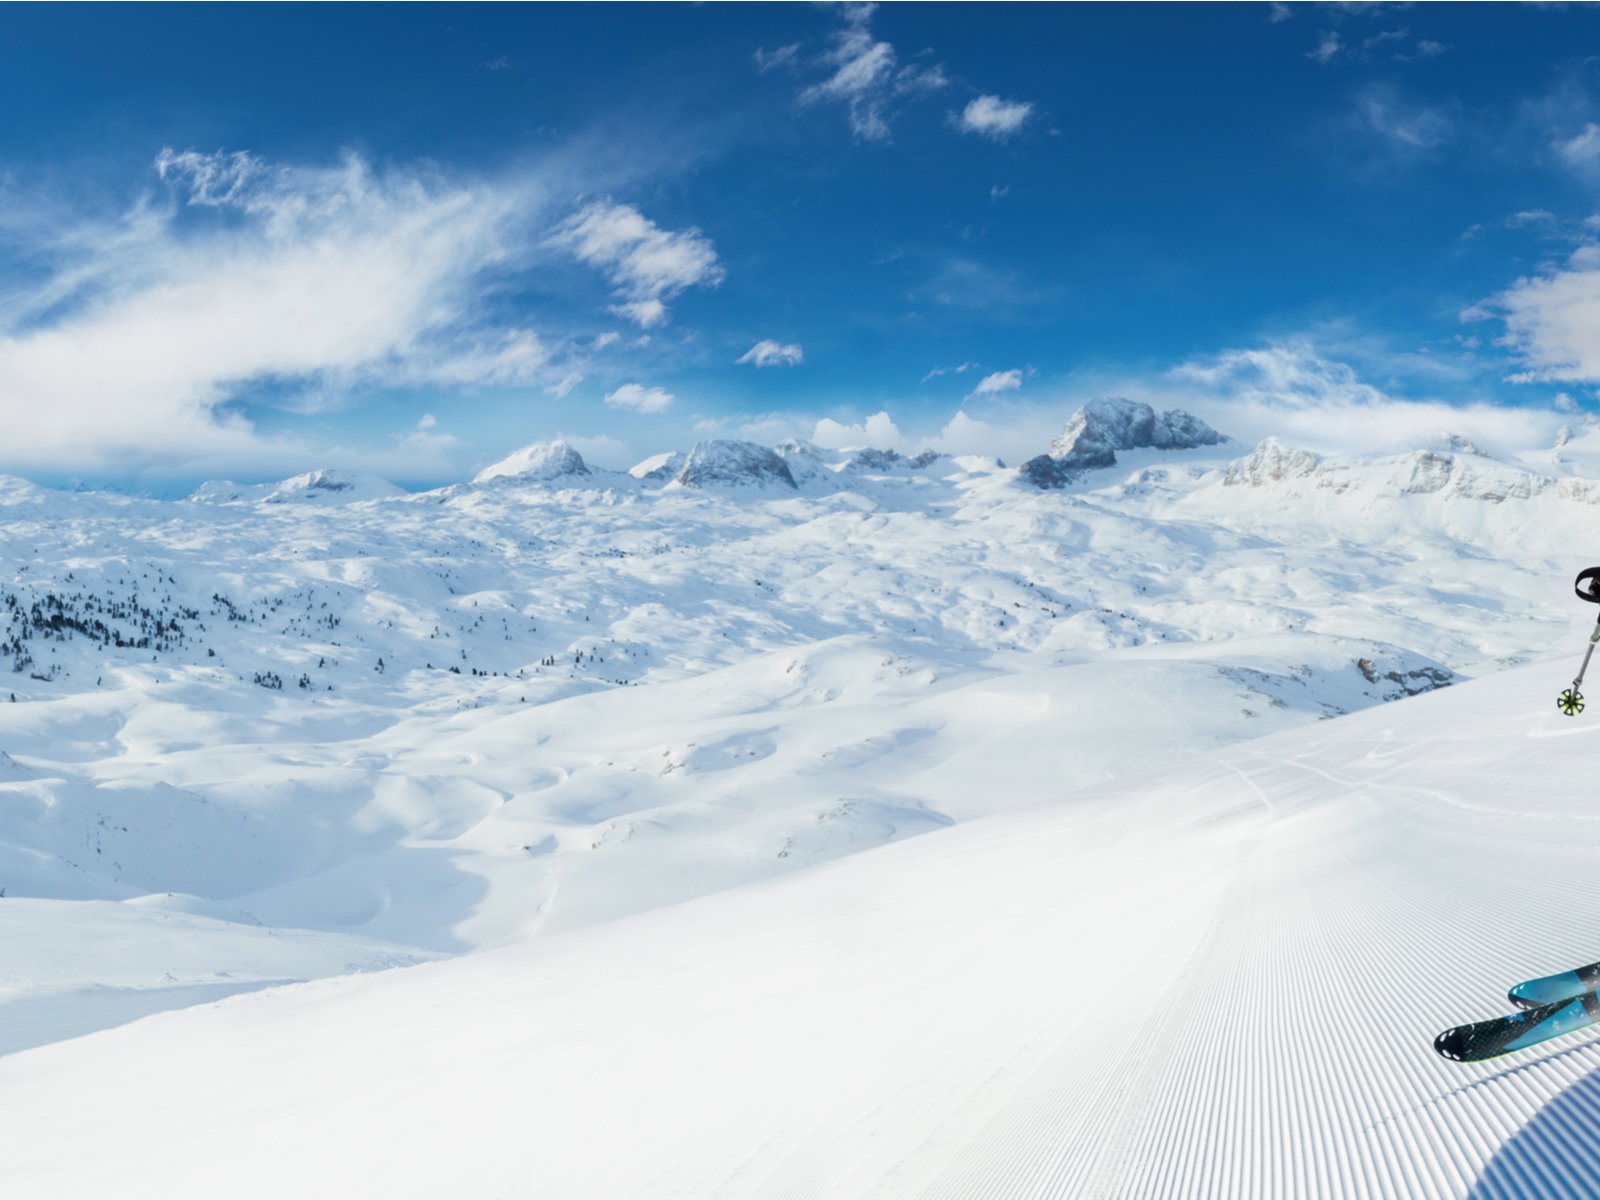 Pack your skis and hit the slopes with our comprehensive guide.